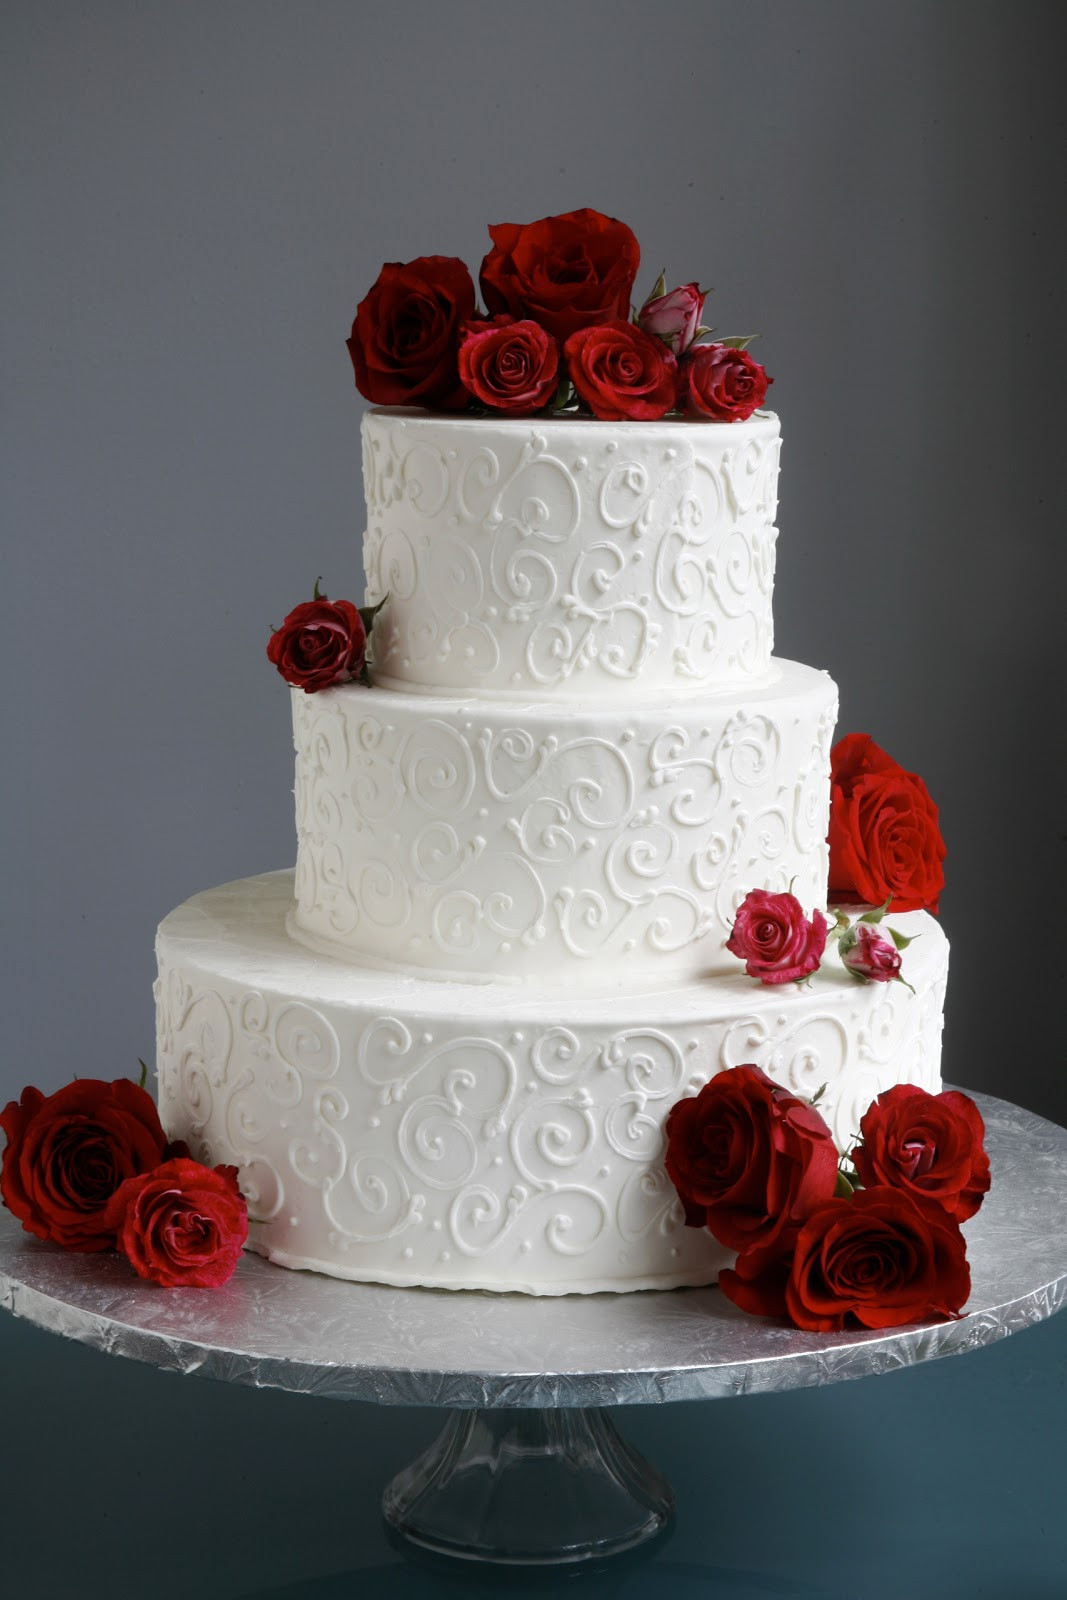 Rose Wedding Cakes
 A Simple Cake Wedding Cake with Fresh Flowers From